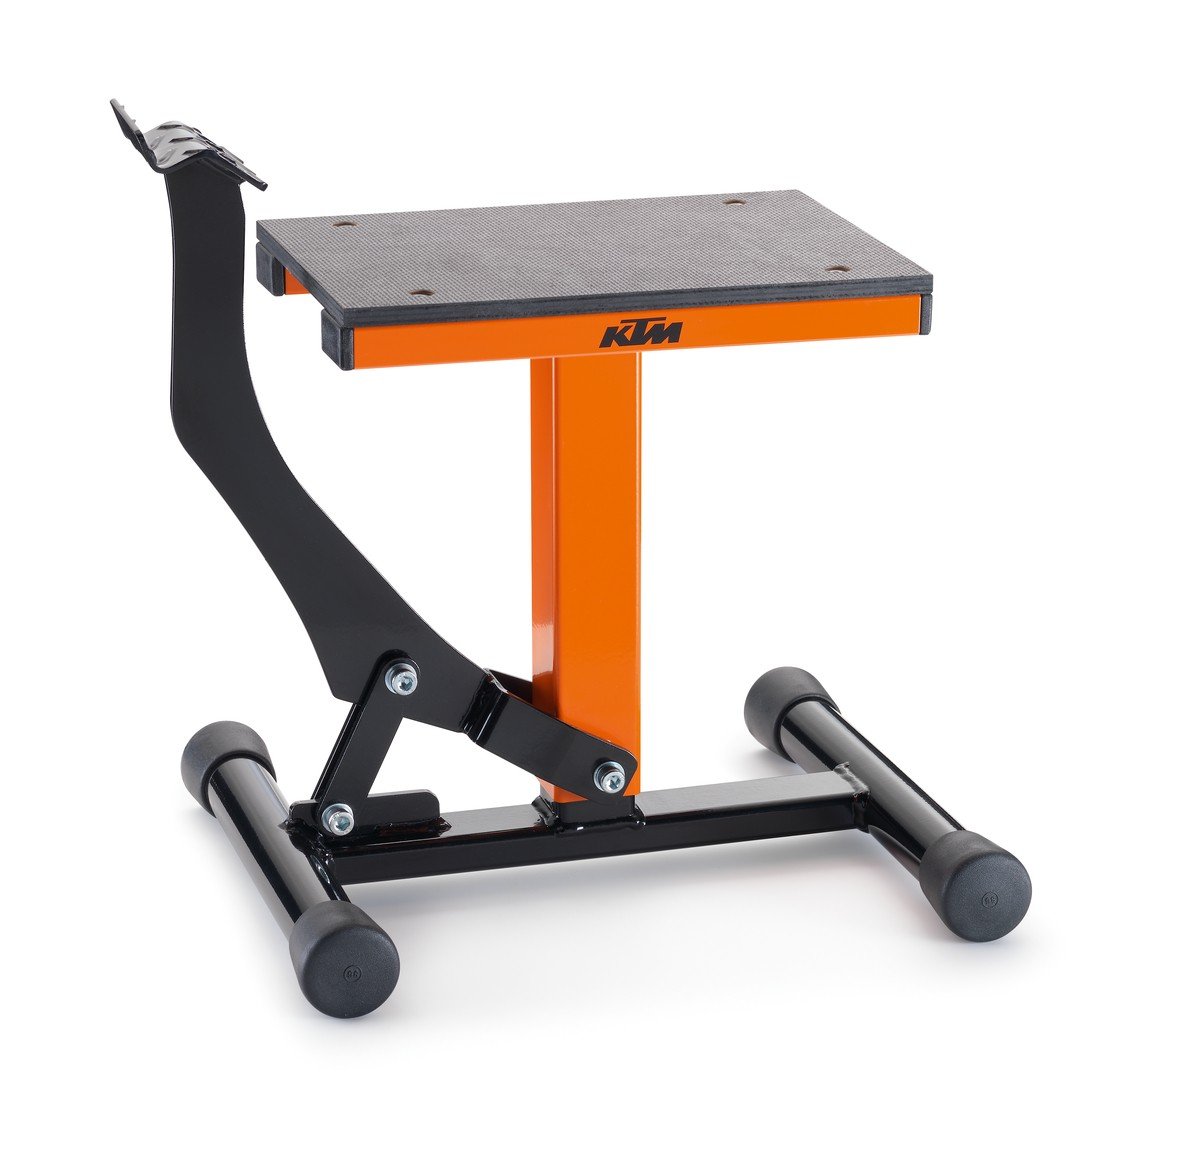 Main image of KTM Foot Lift Stand SX/EXC